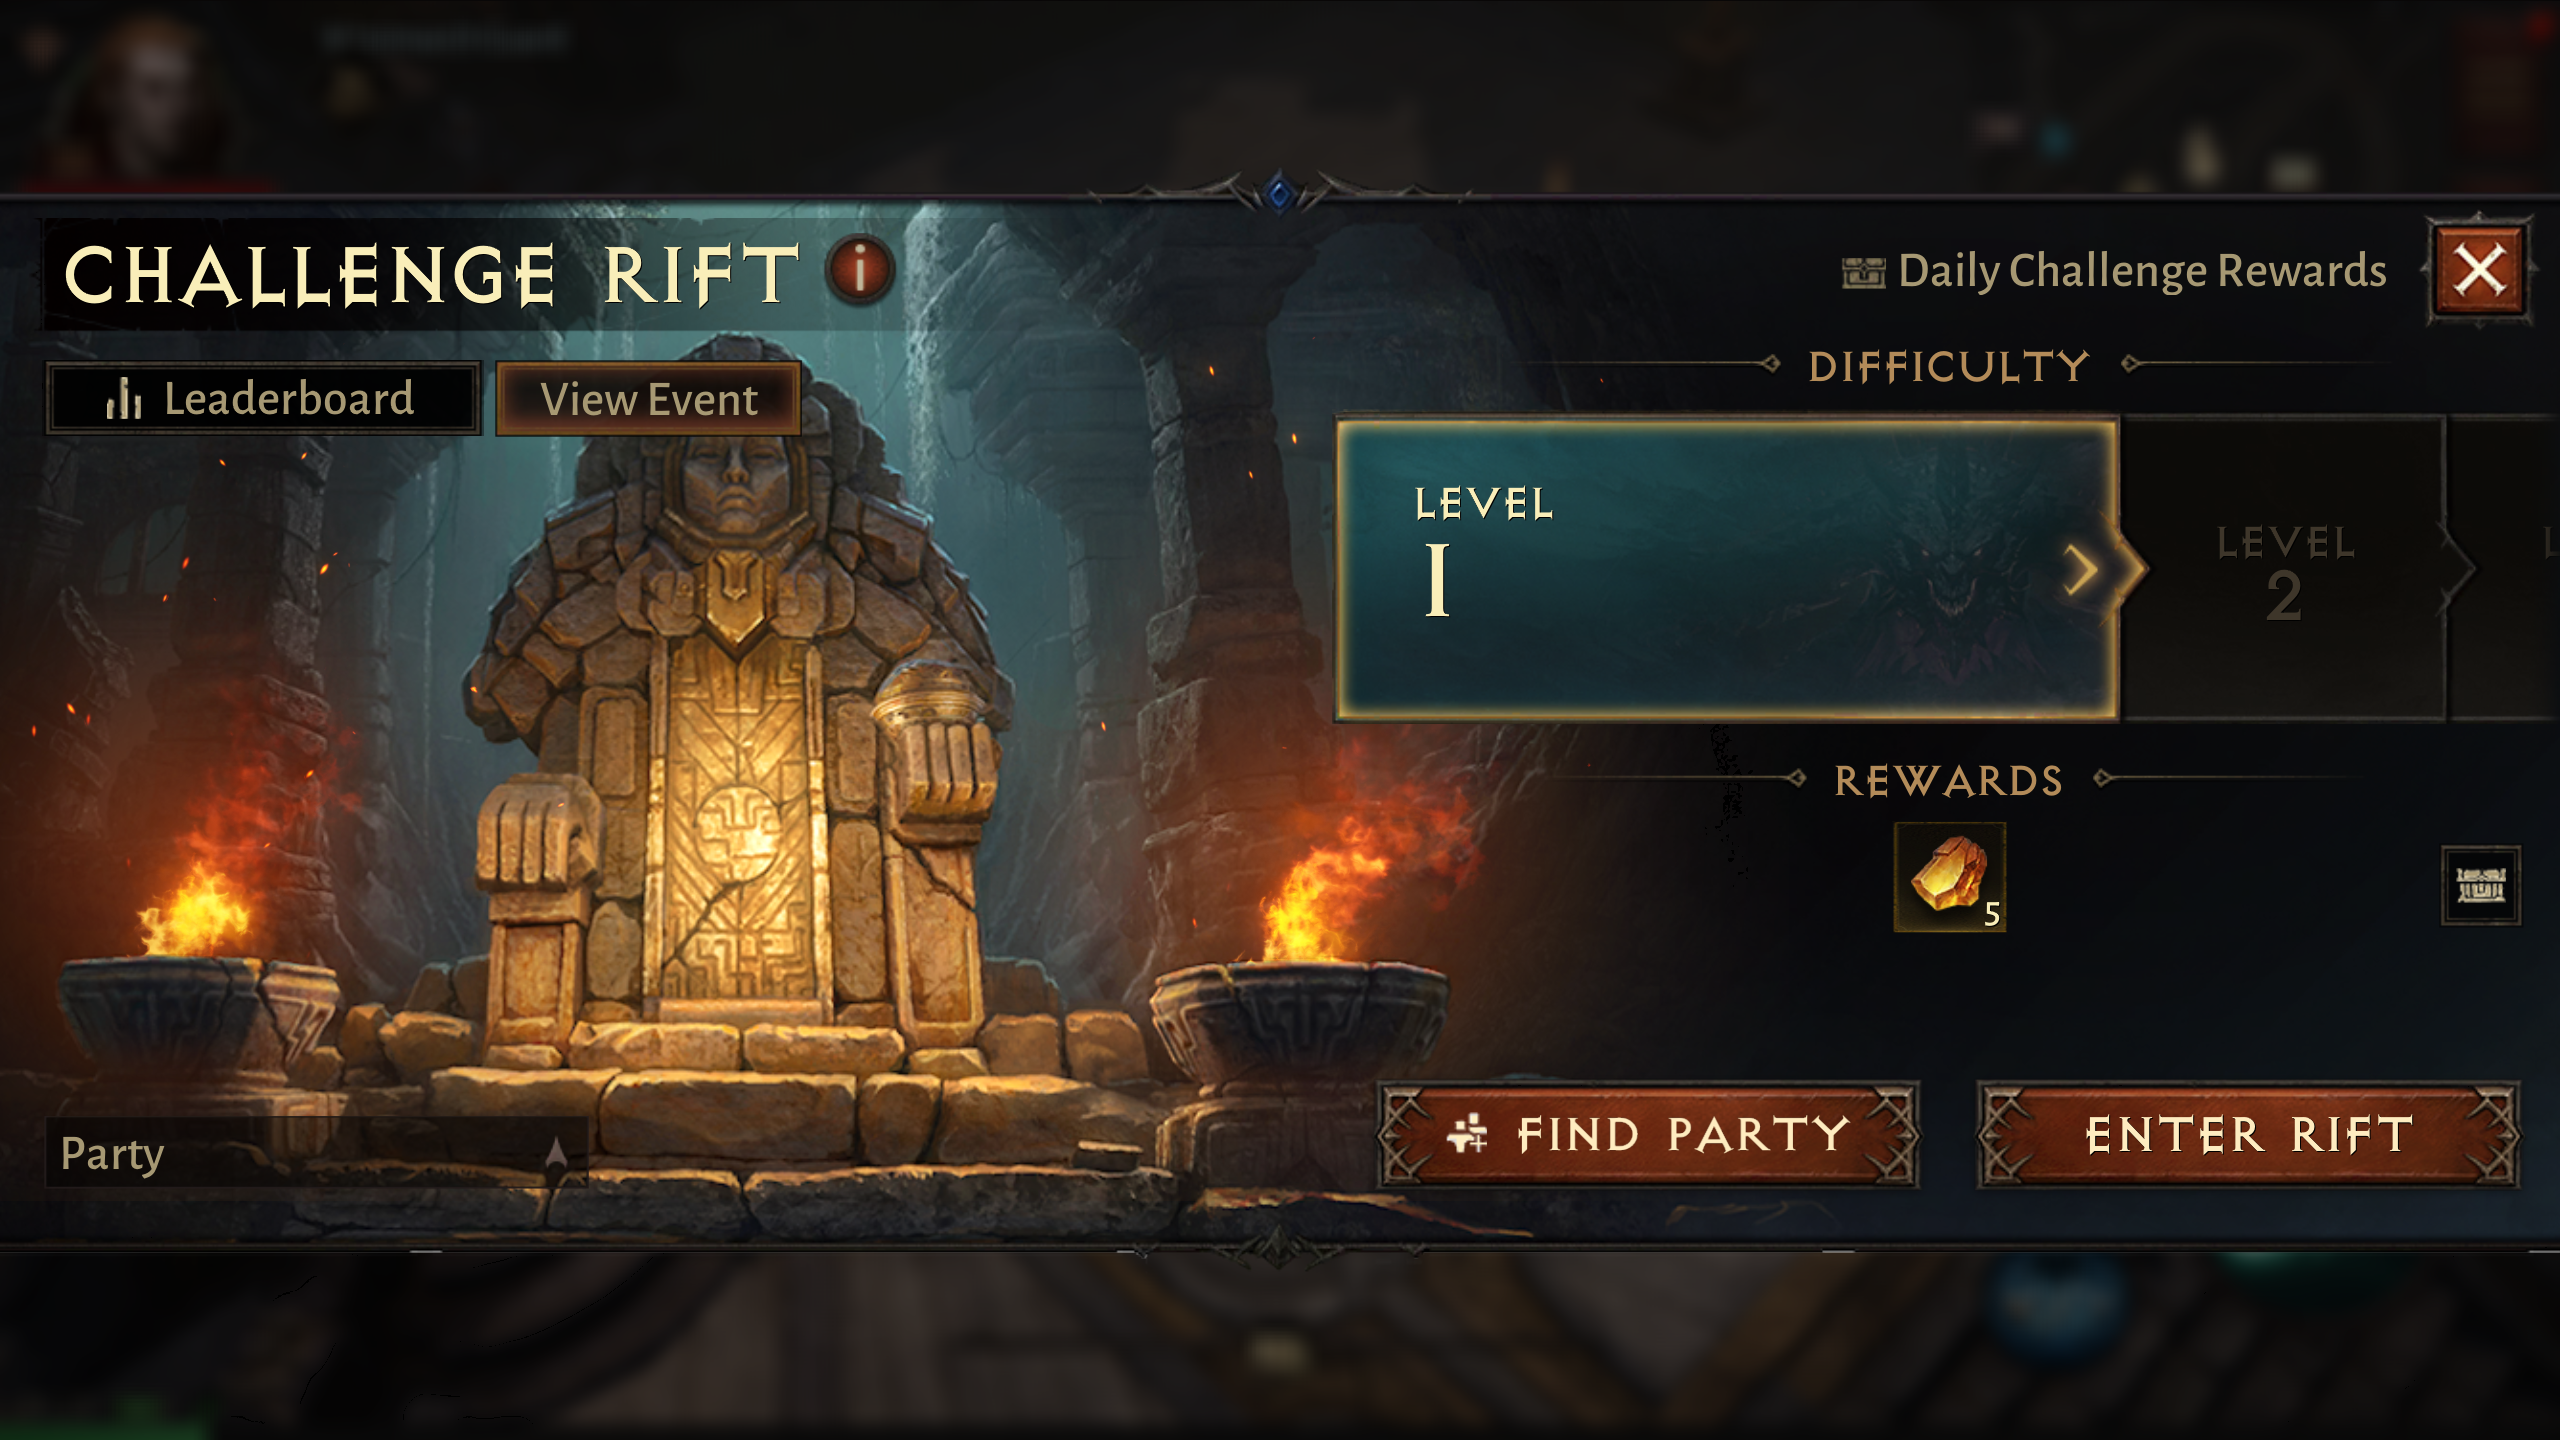 The Challenge Rift difficulty screen, next to the Elder Rift, in Diablo Immortal